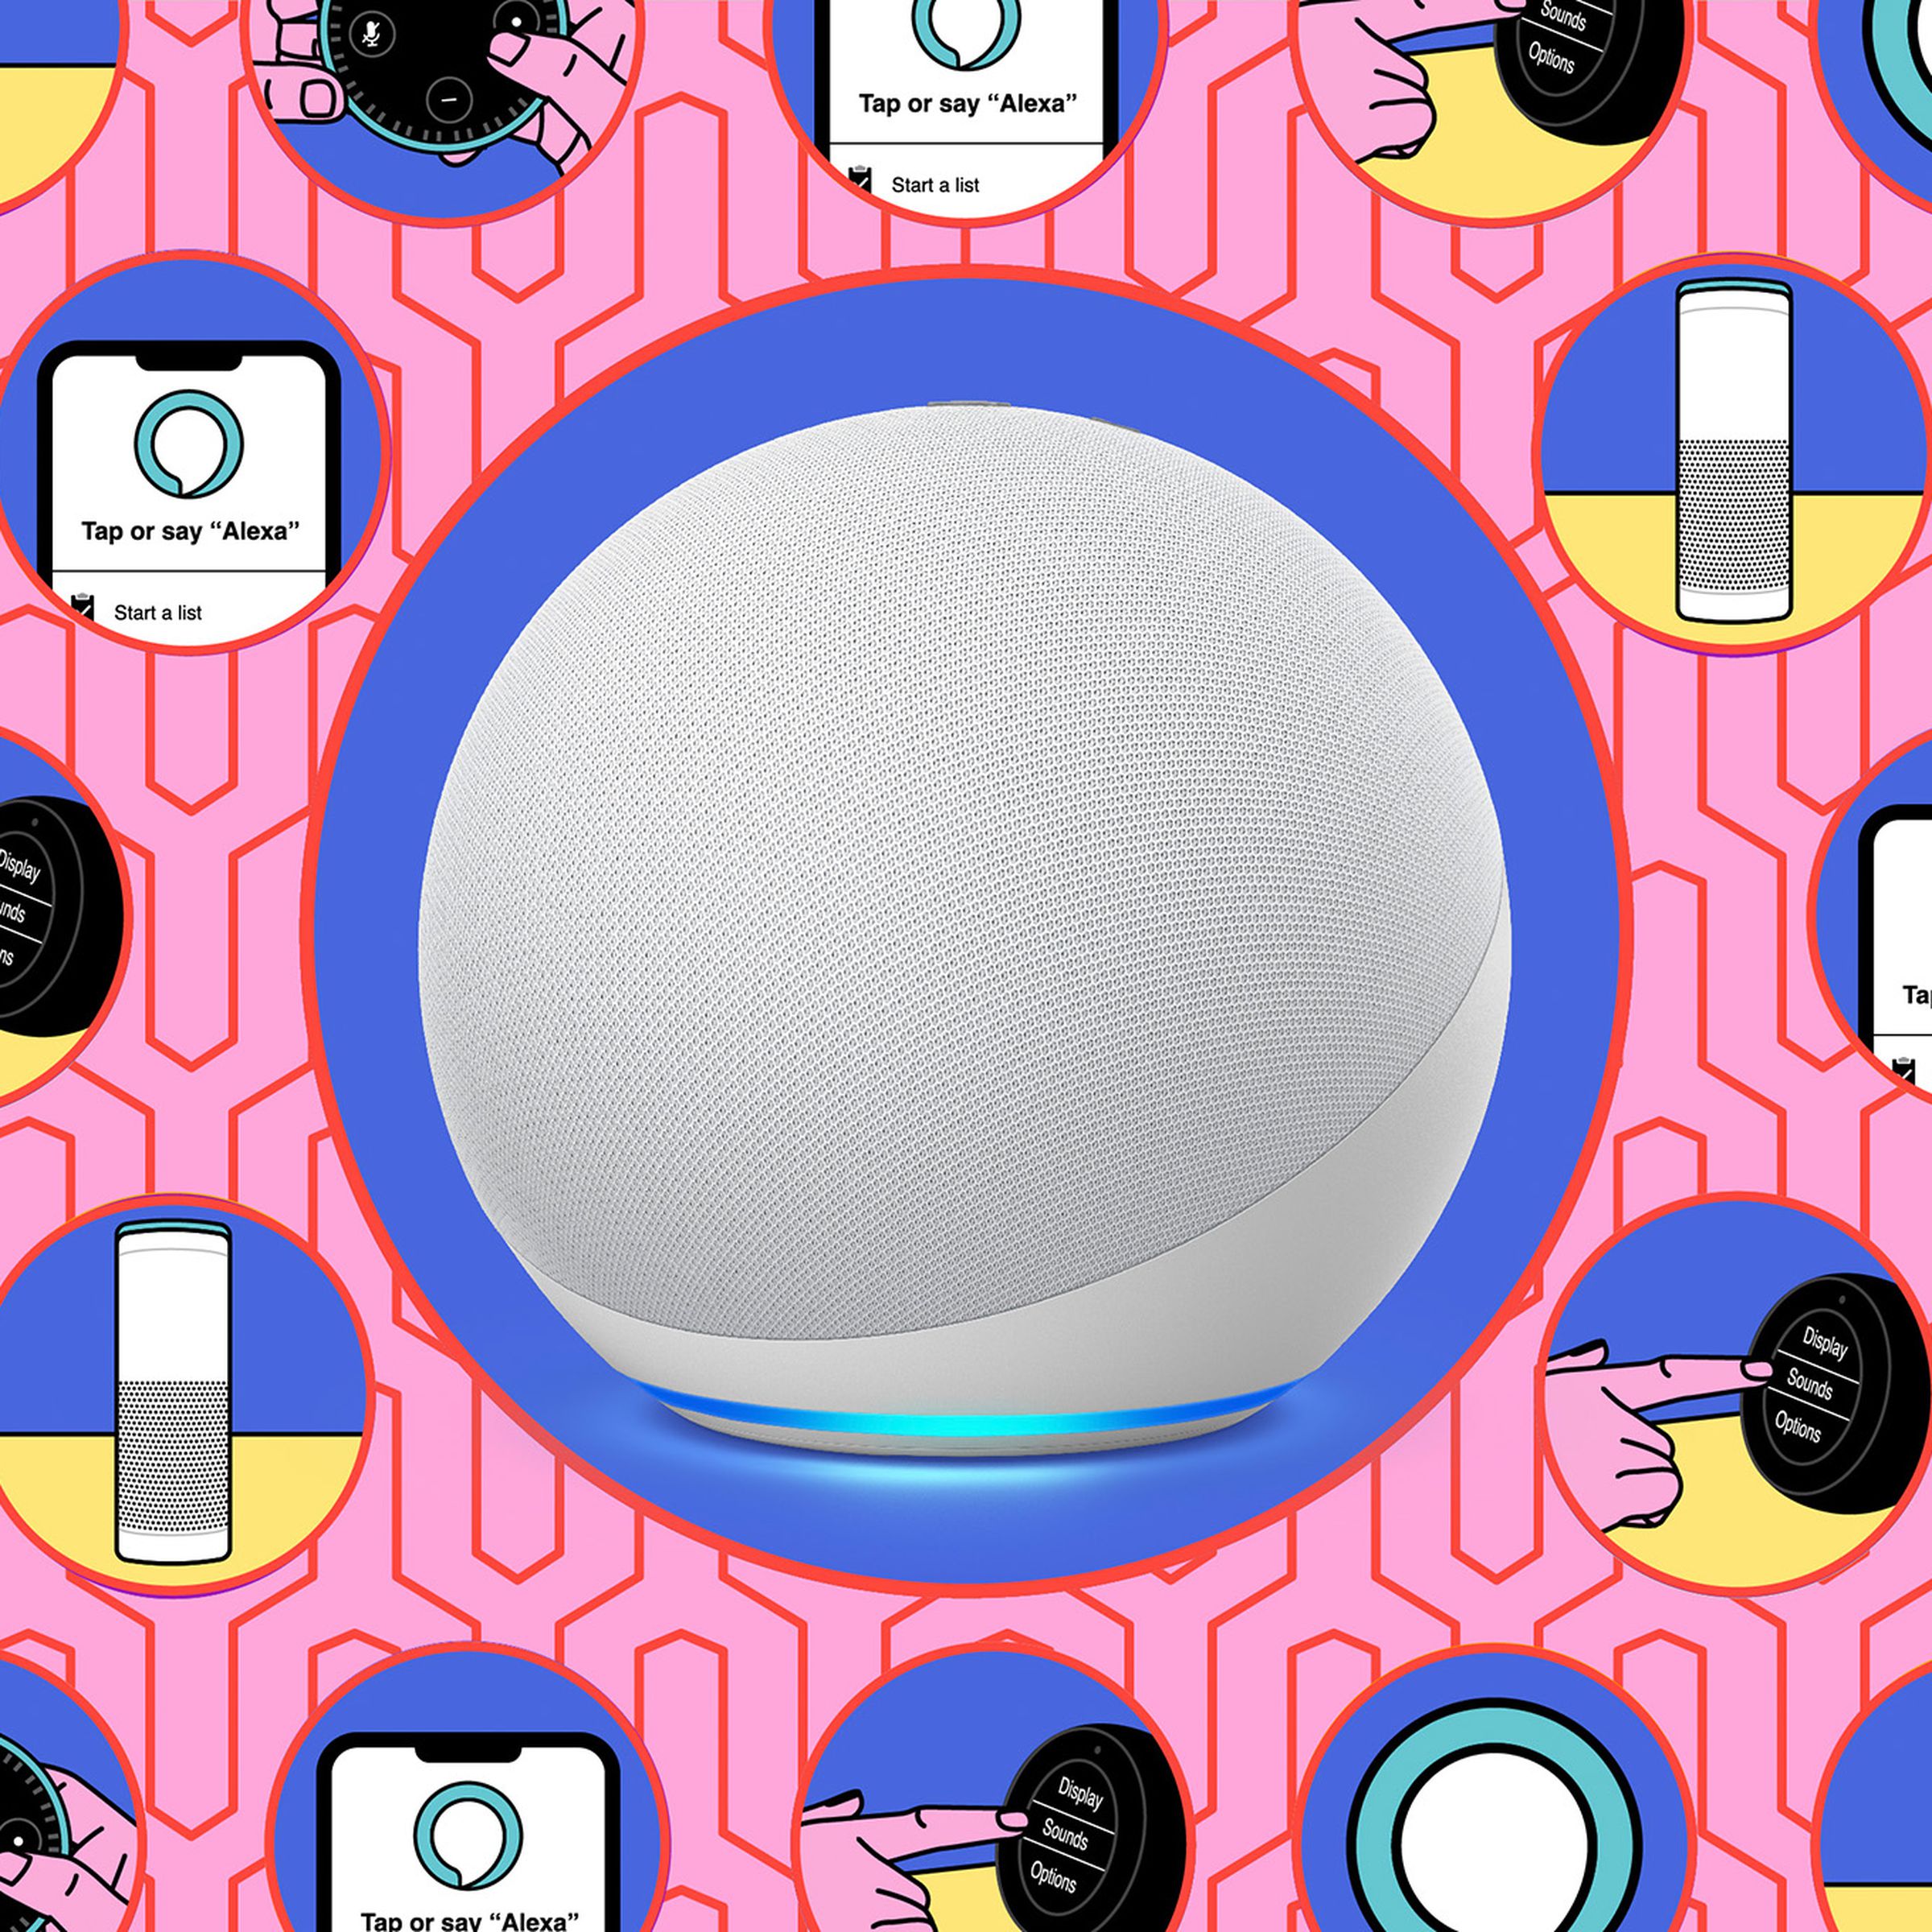 White Echo Dot surrounded by illustrations.